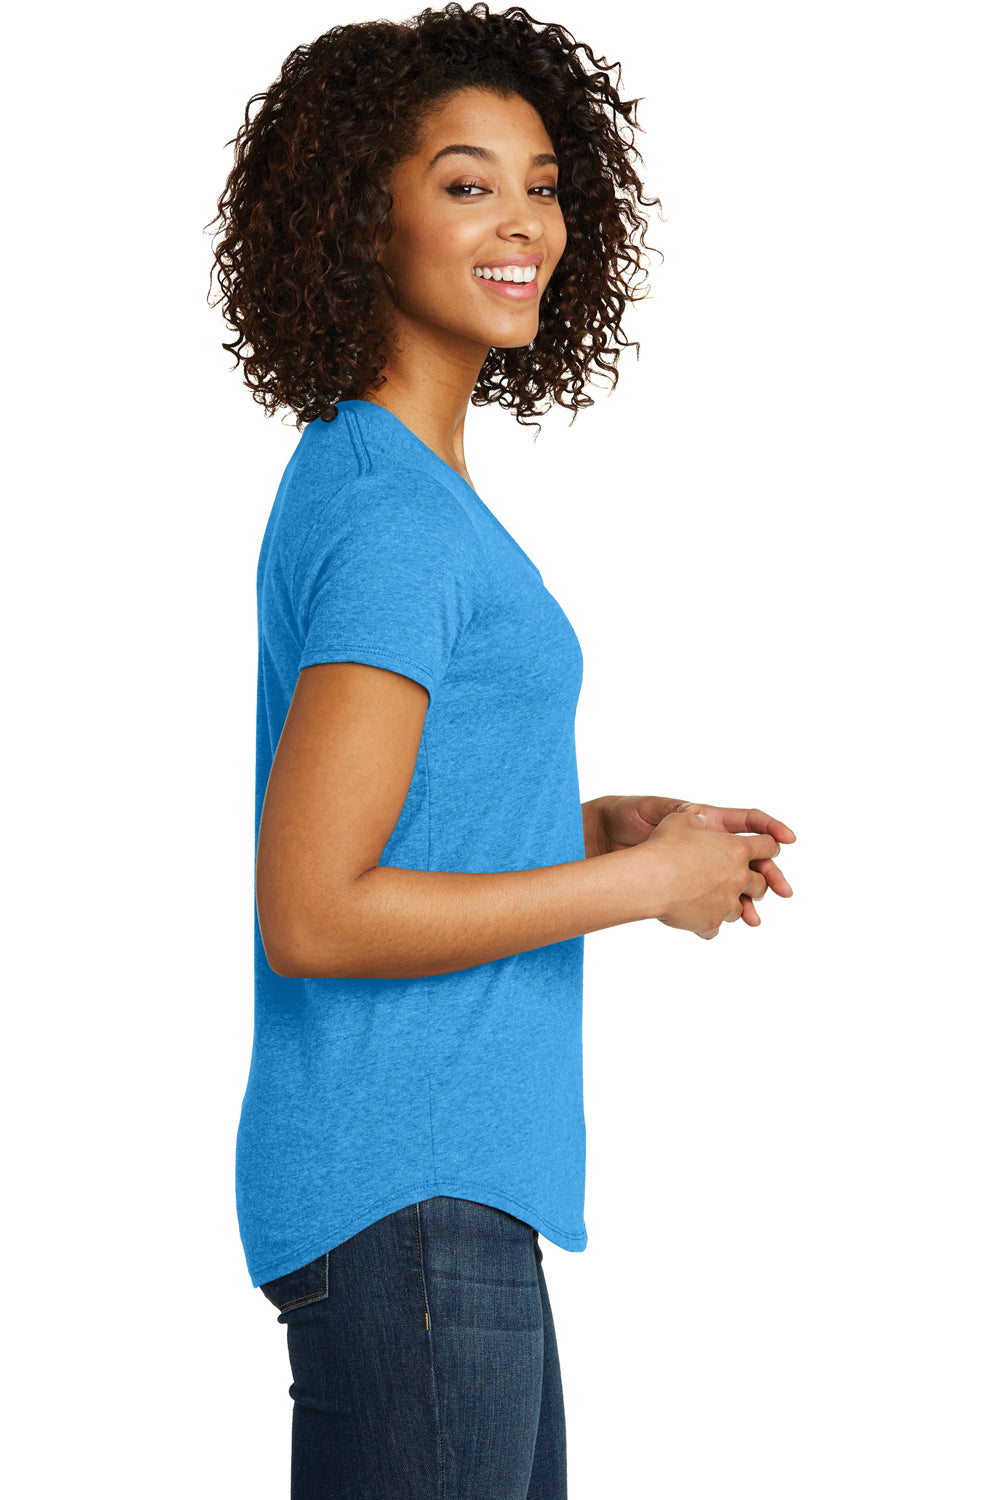 District DT6401 Womens Very Important Short Sleeve Crewneck T-Shirt Heather Turquoise Blue Side